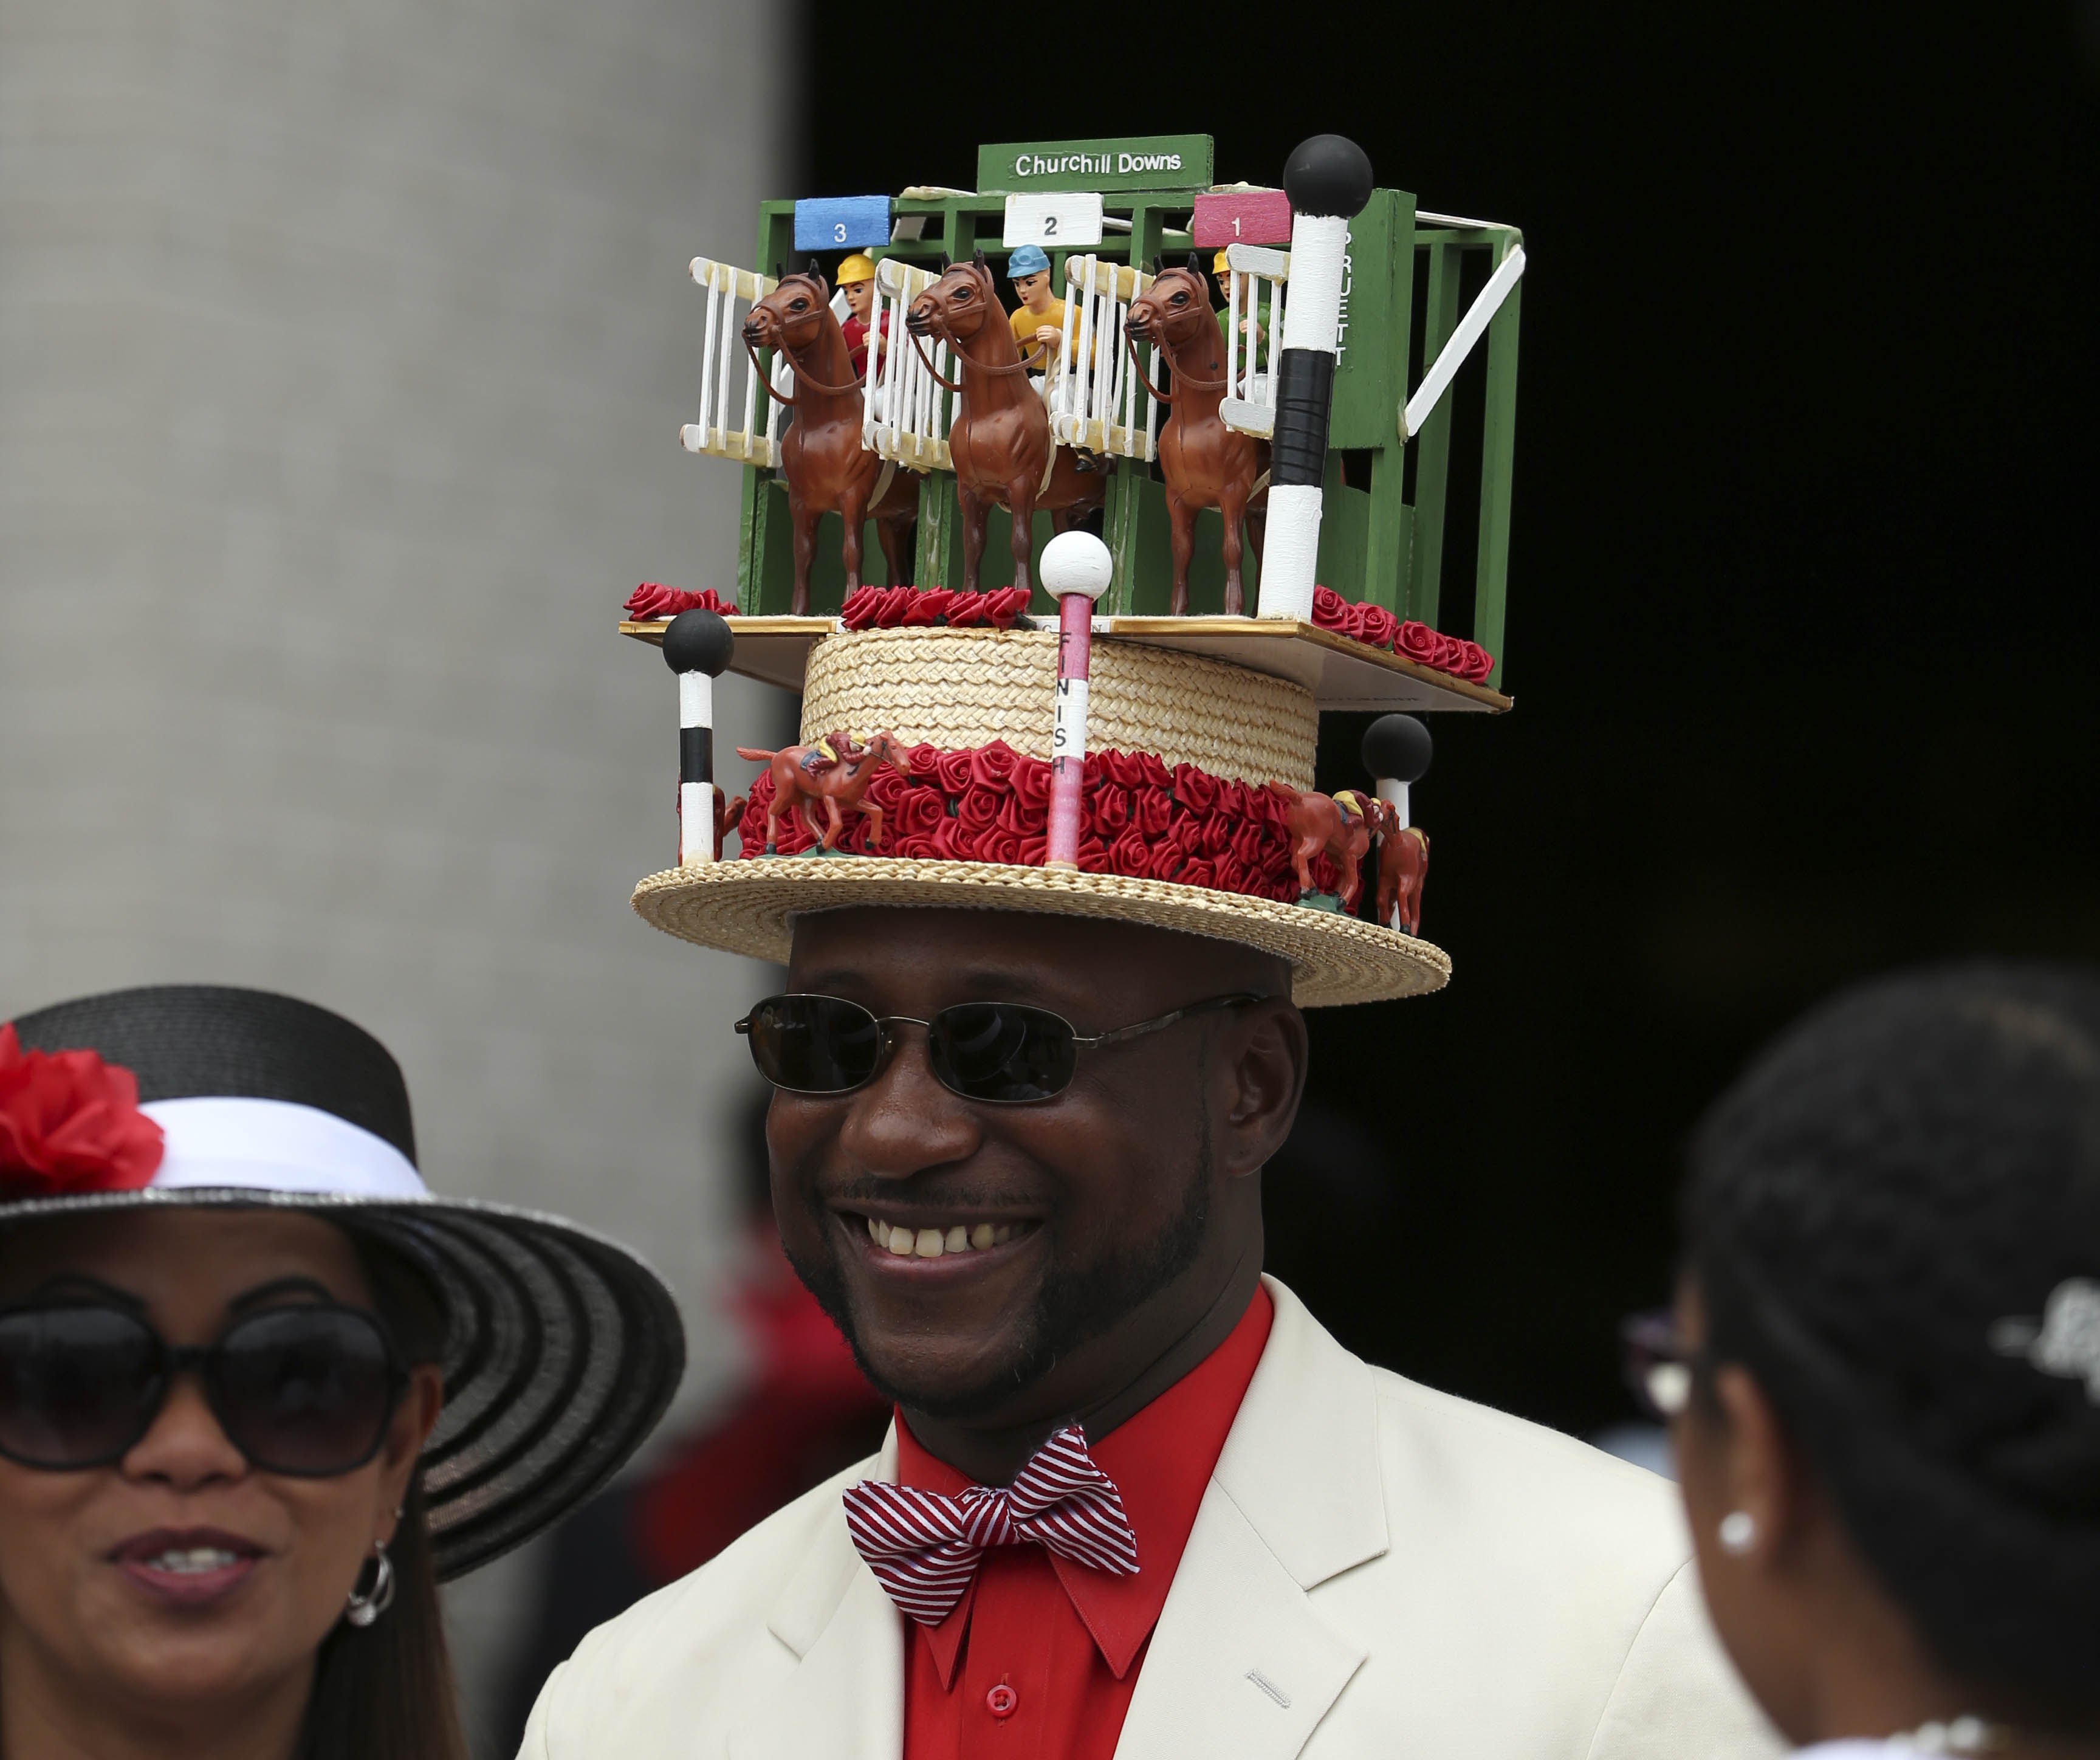 Man with a hat during the 142nd running of the Kentucky Oaks horse race at Churchill Downs on May 7, 2016, in Louisville, Ky.